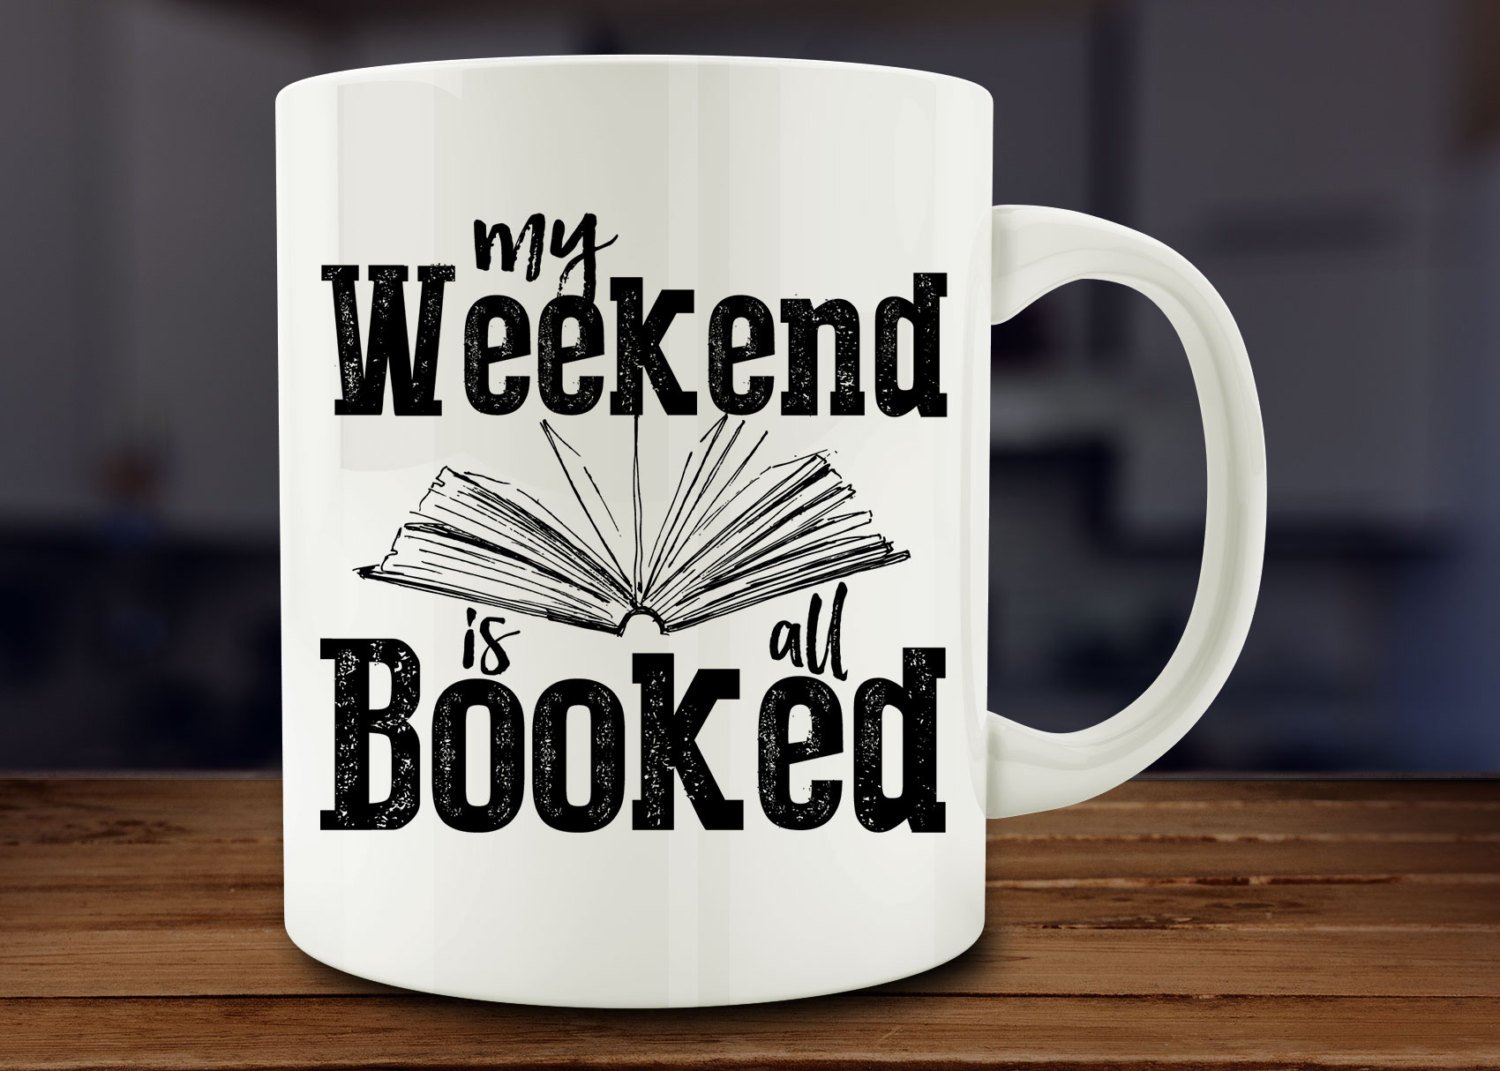 Last weekend my friends and i. My weekend. Weekends тема. My weekend 5 класс. My weekend картинки.